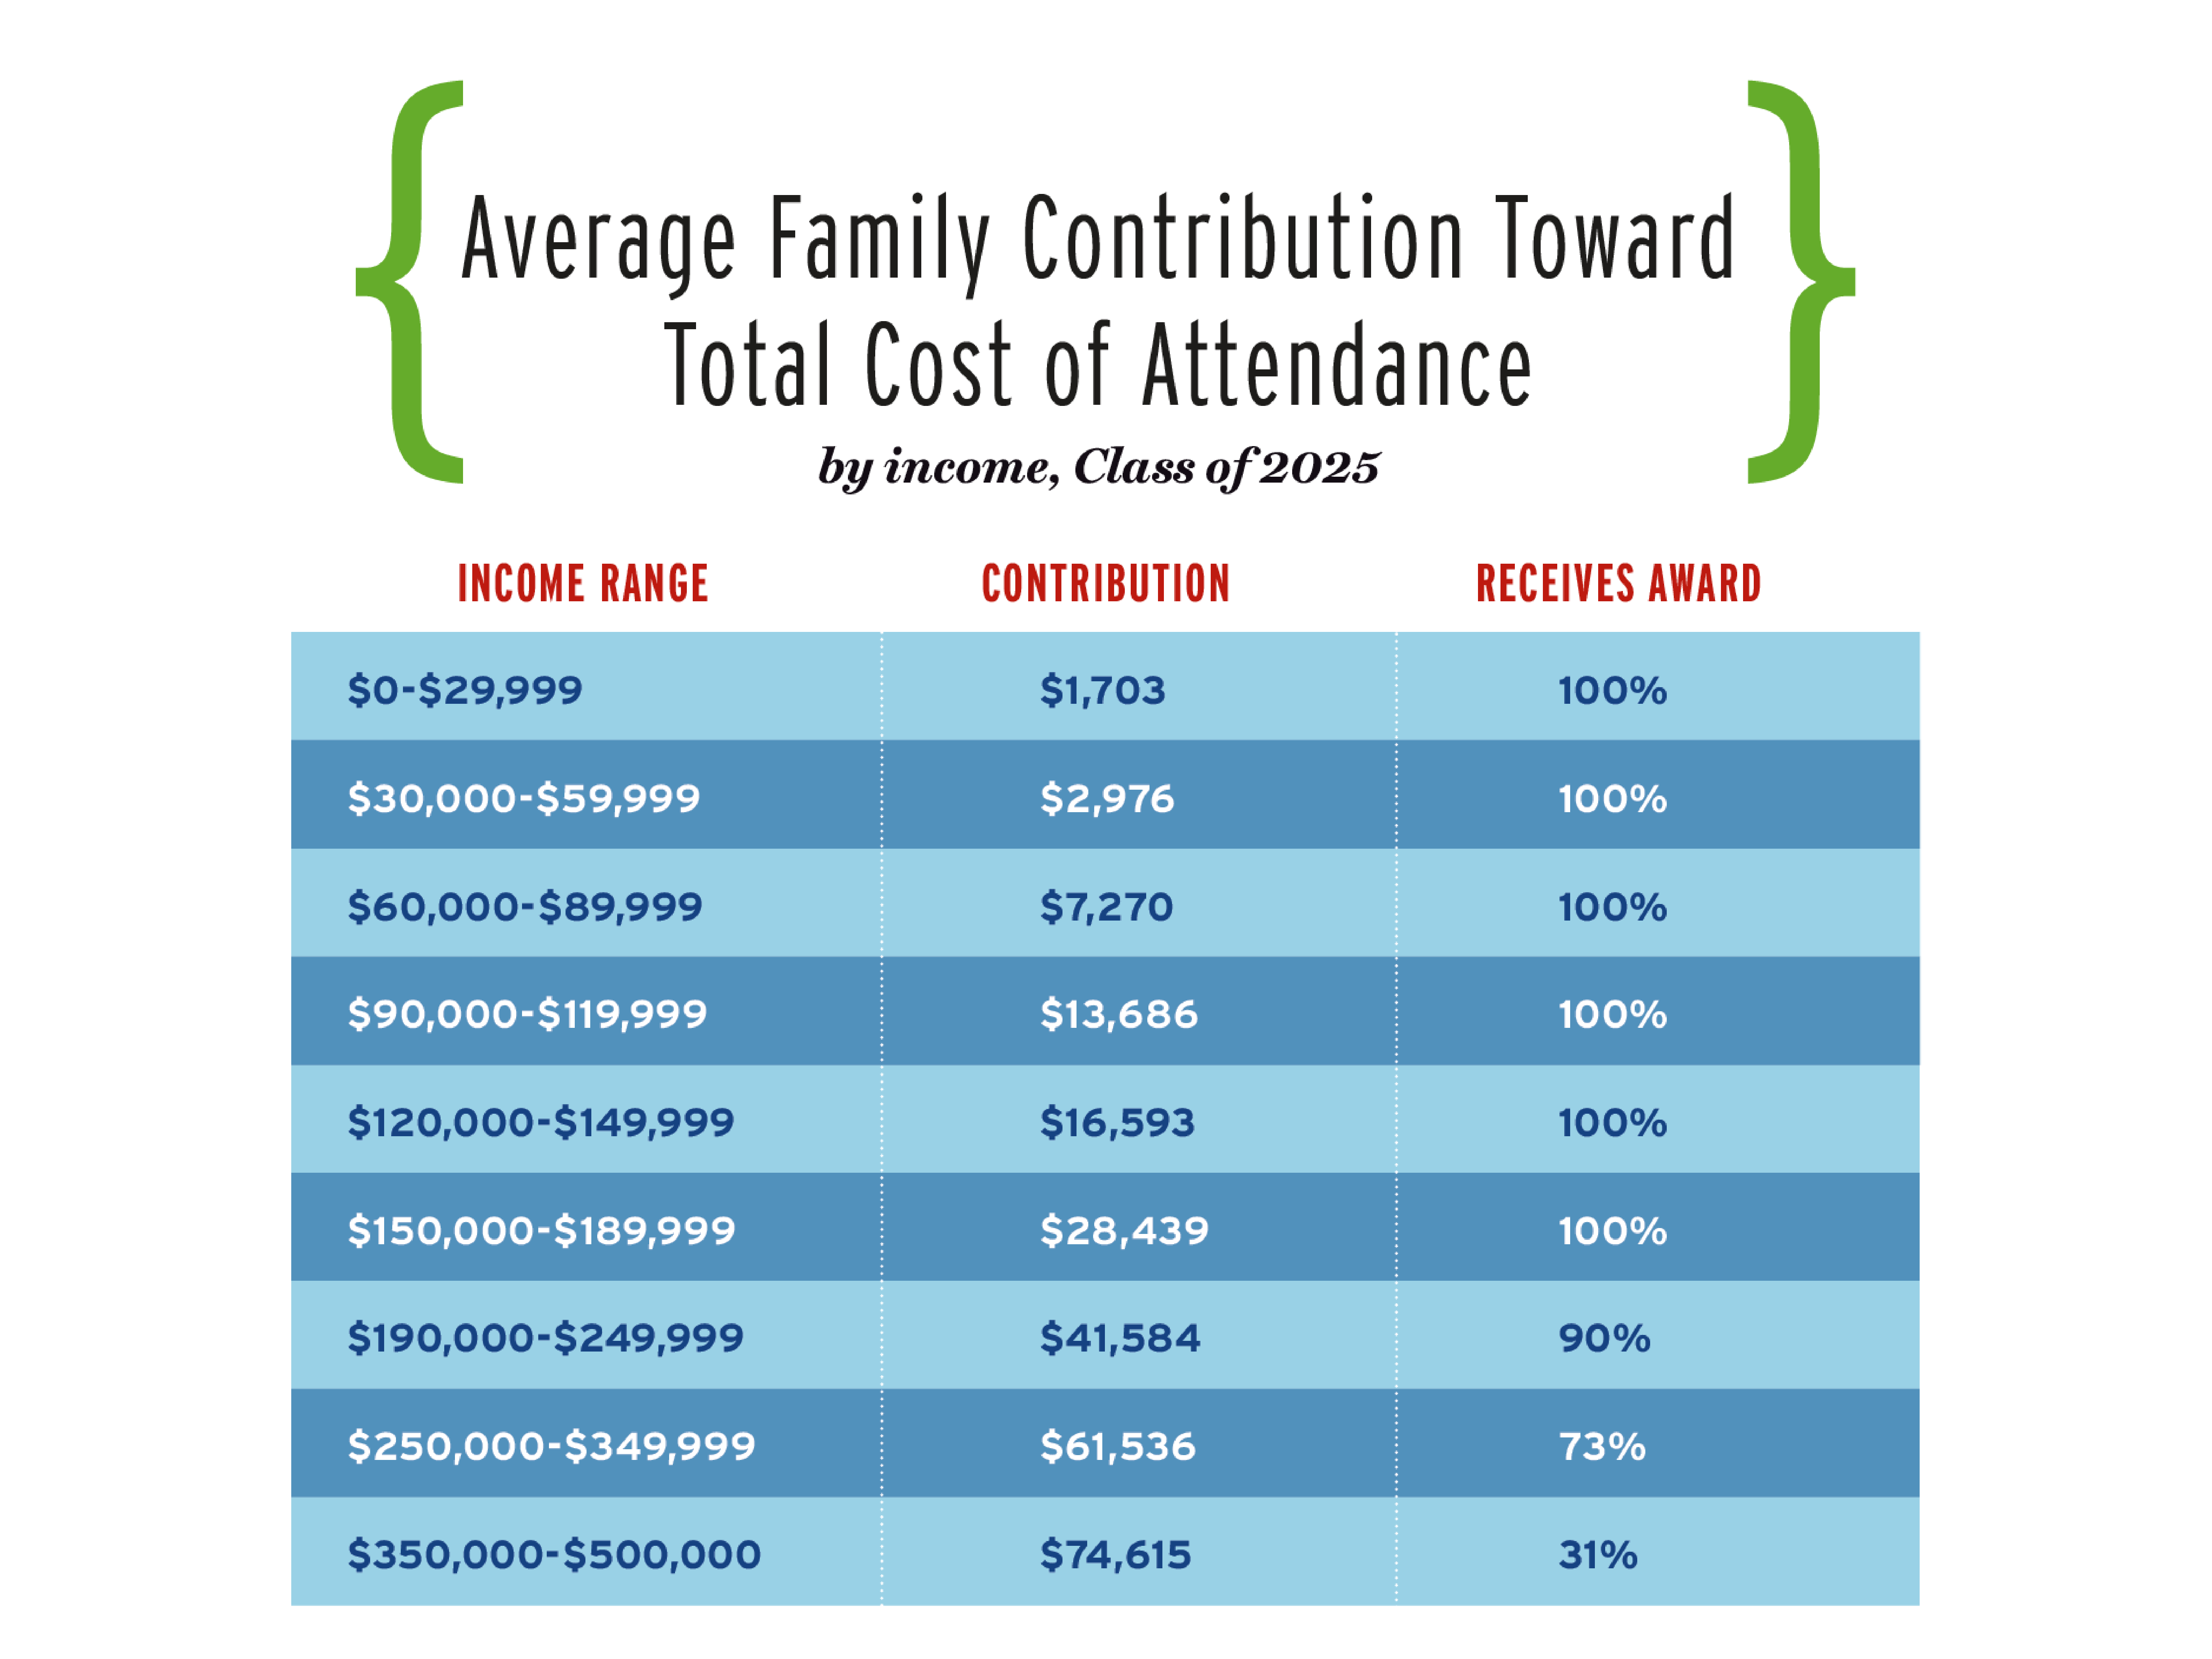 Average Family Contribution Toward Total Cost of Attendance by income, Class of 2025